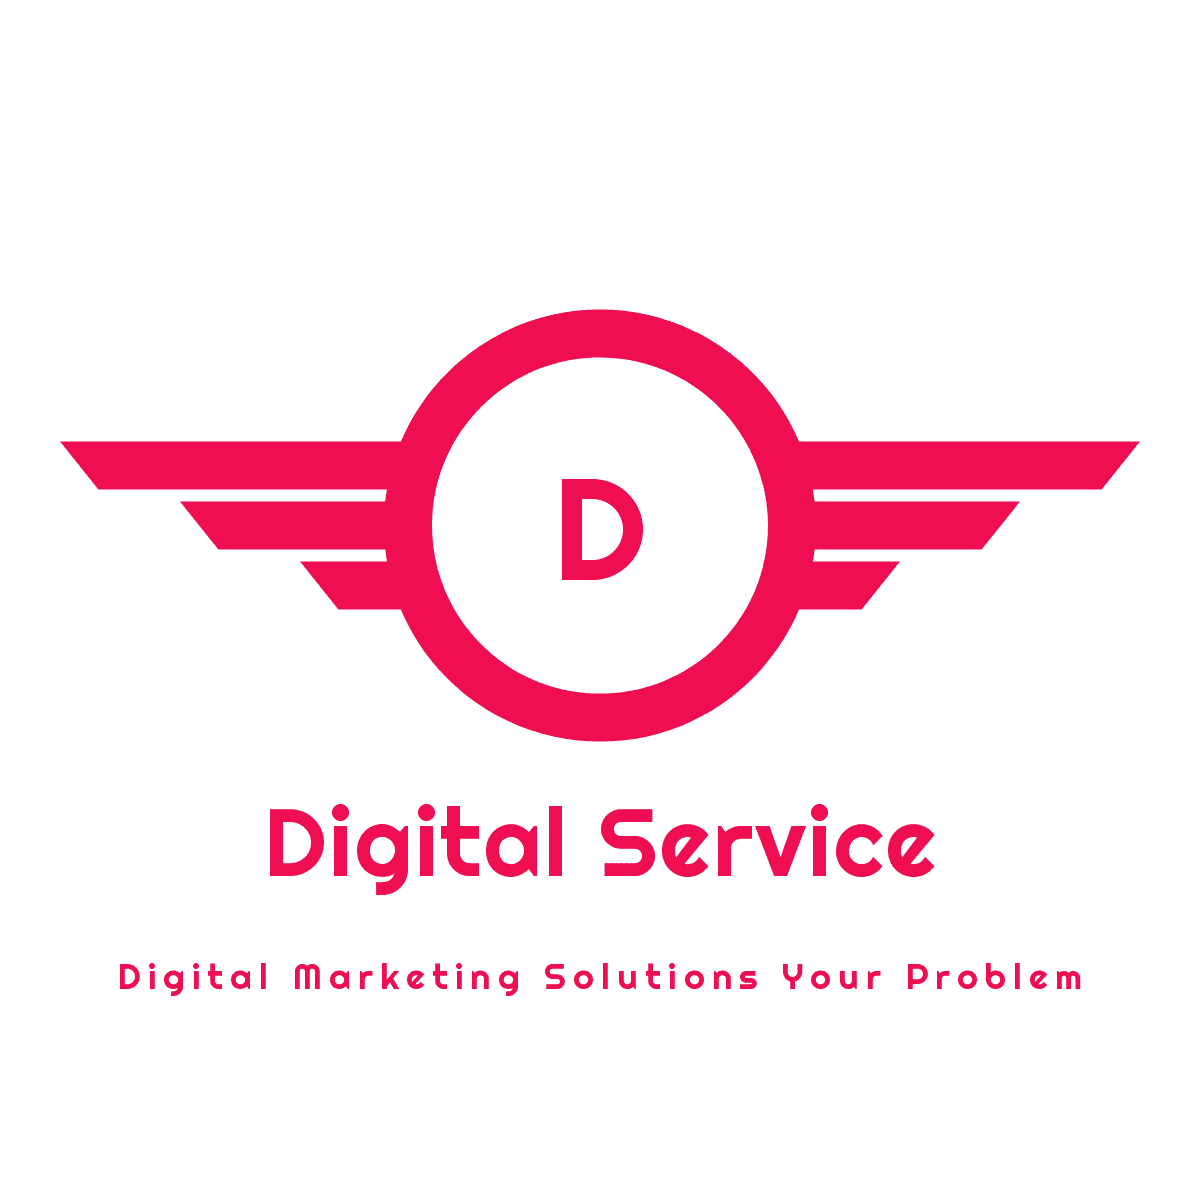 Digital Service gives you all the solution of digital marking Digital Service